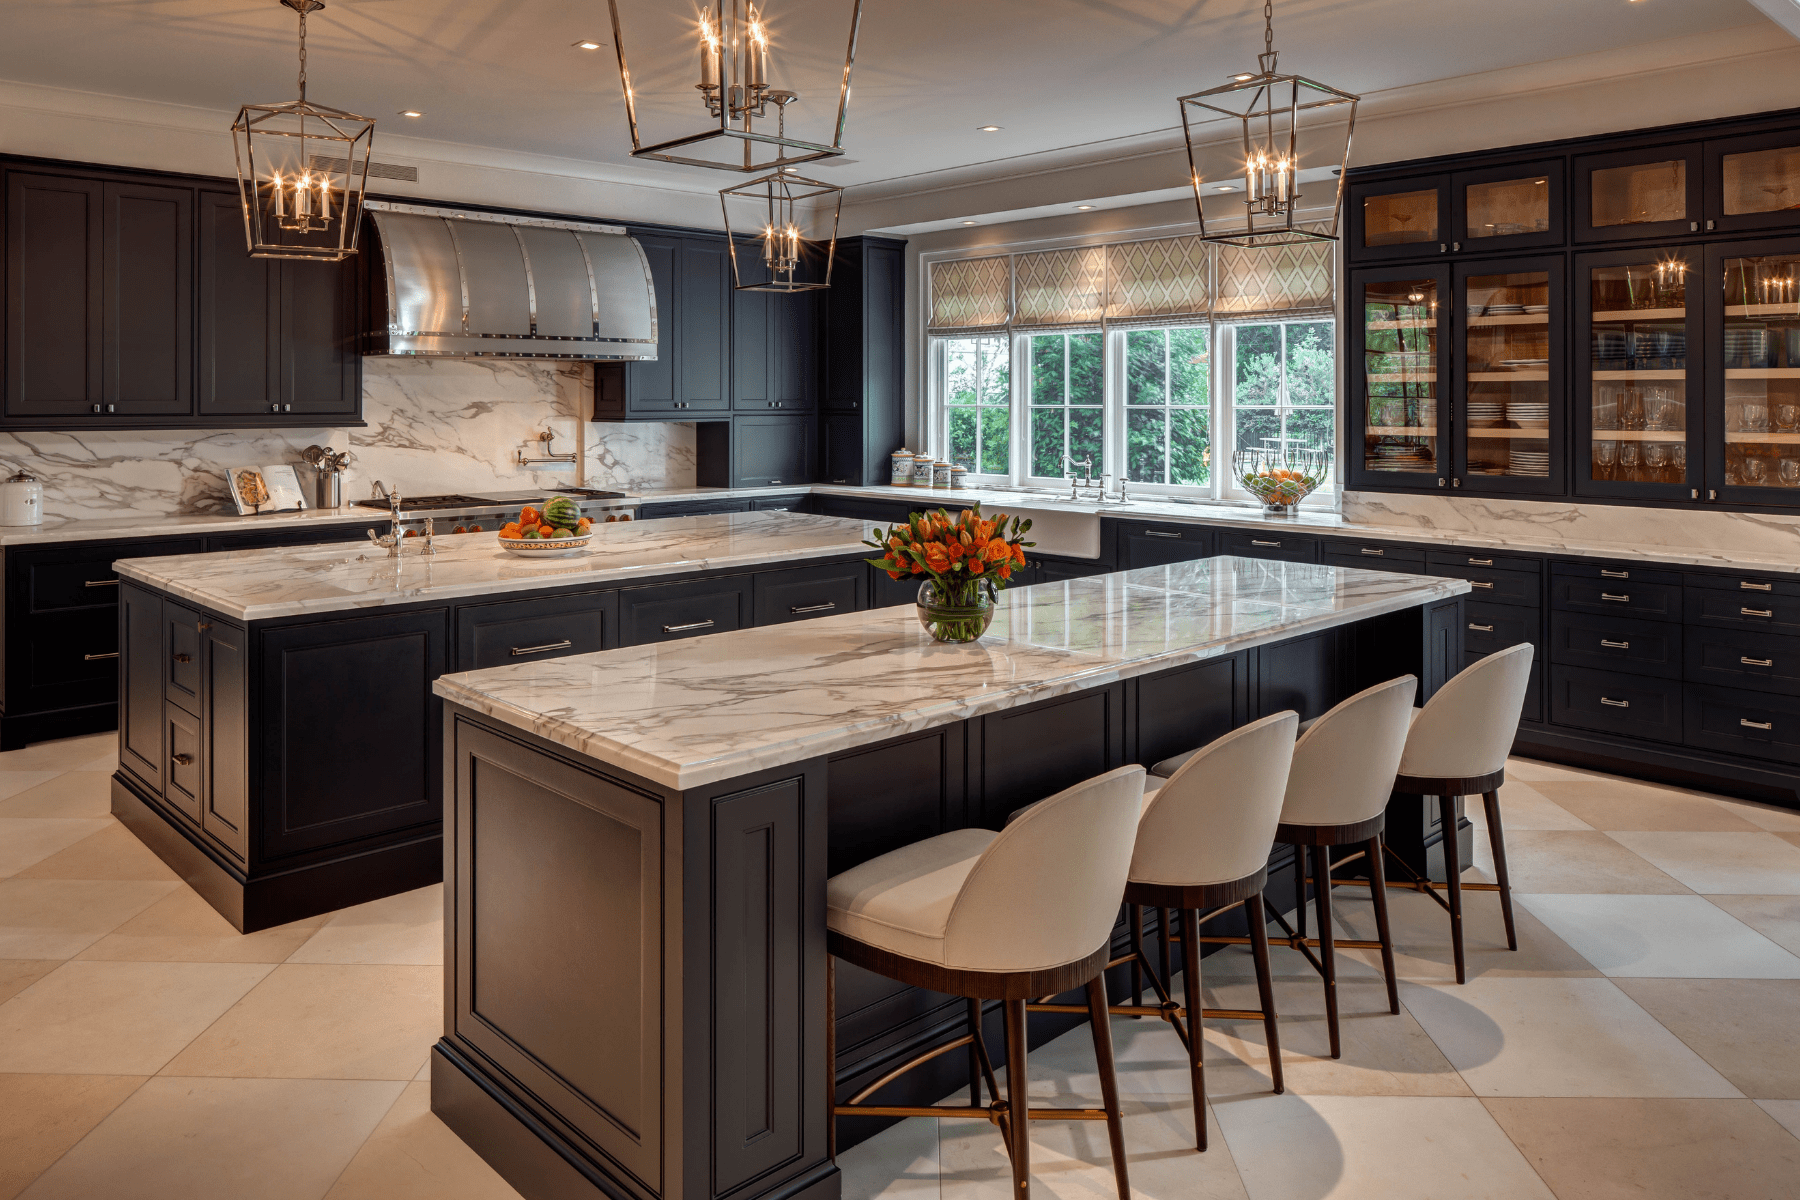 The Willowick kitchen featuring marble counter tops paired with chic stools and lighting fixtures.